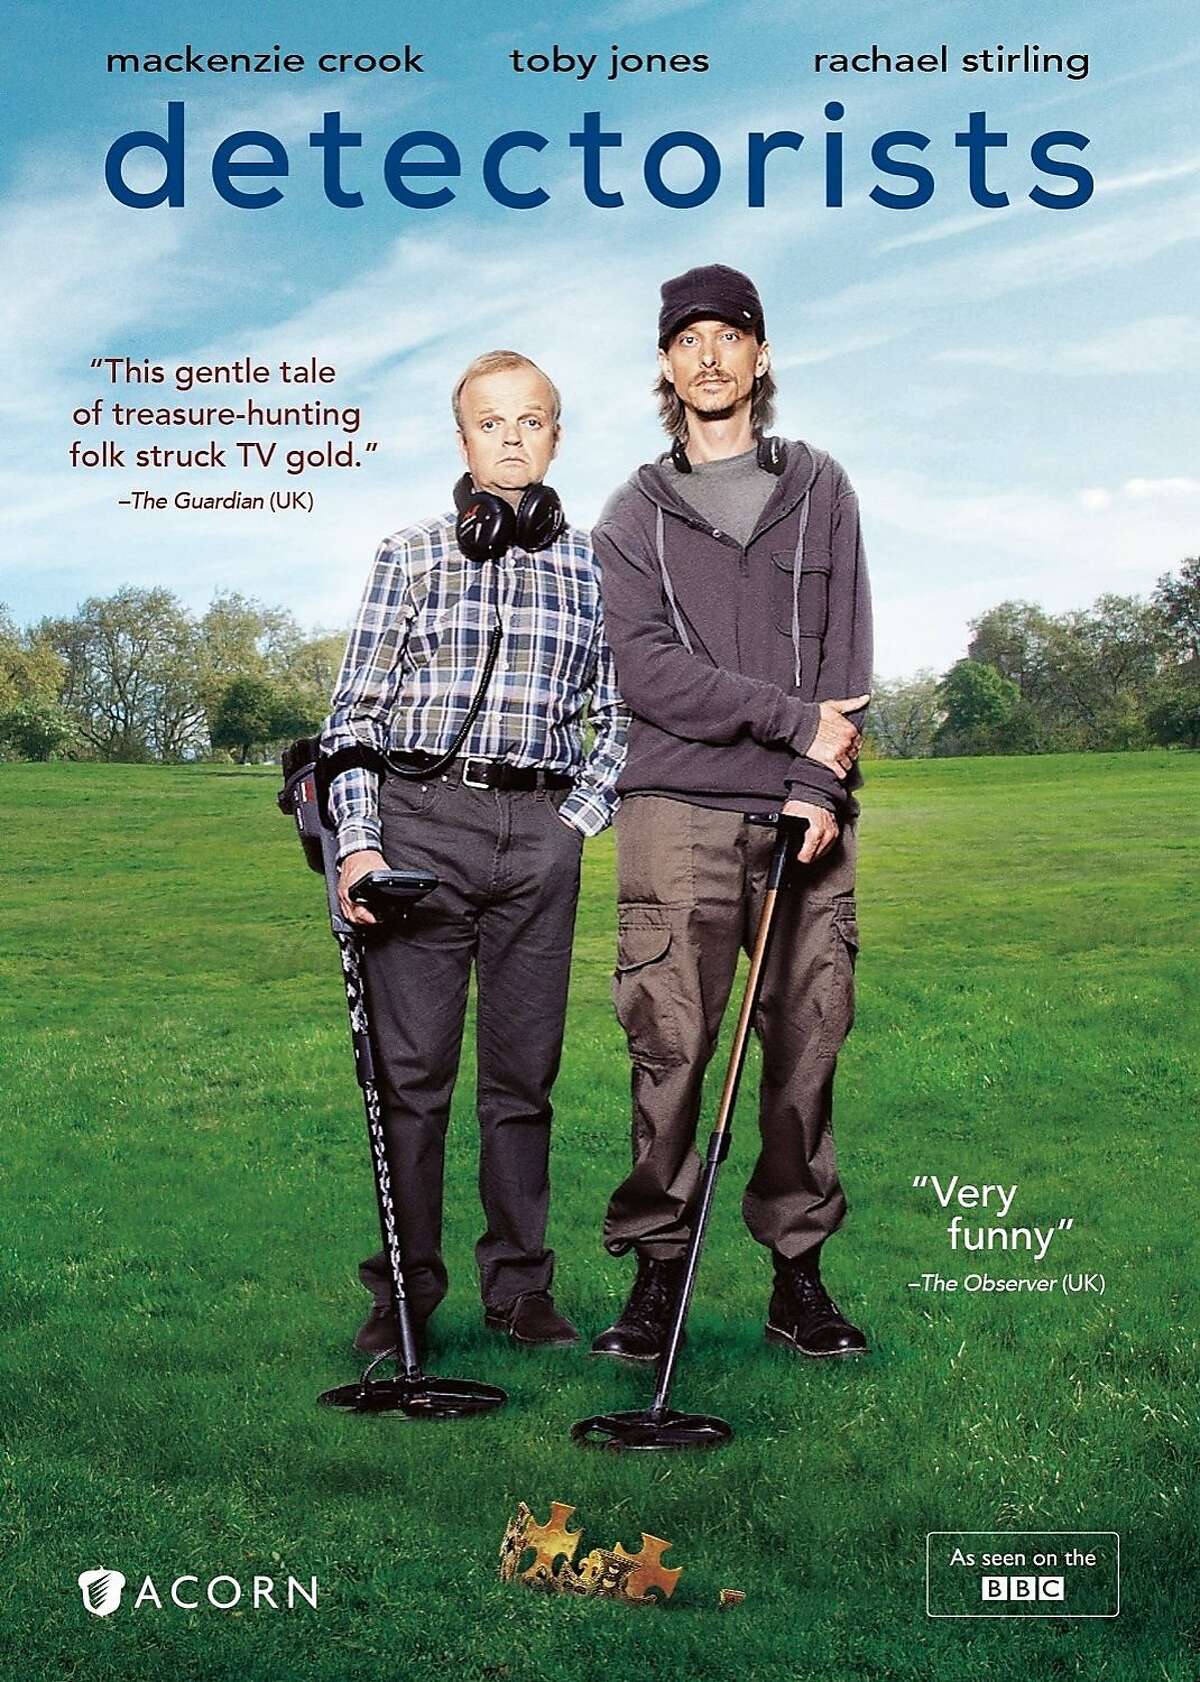 dvd cover "Detectorists"